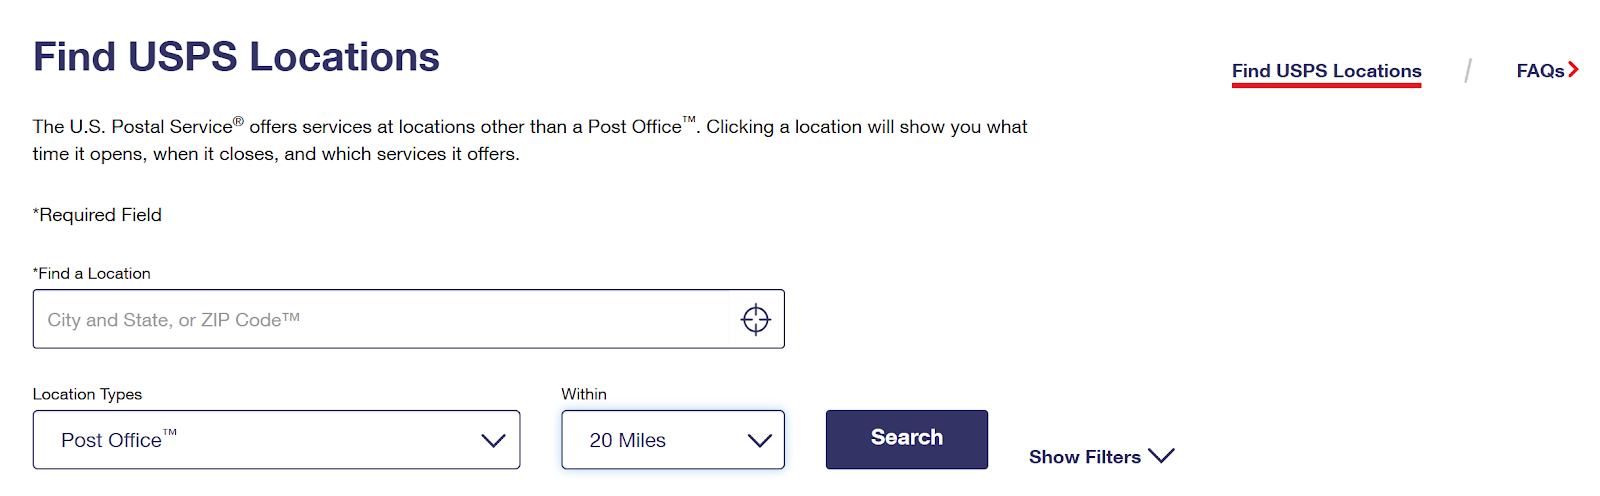 Find USPS locations